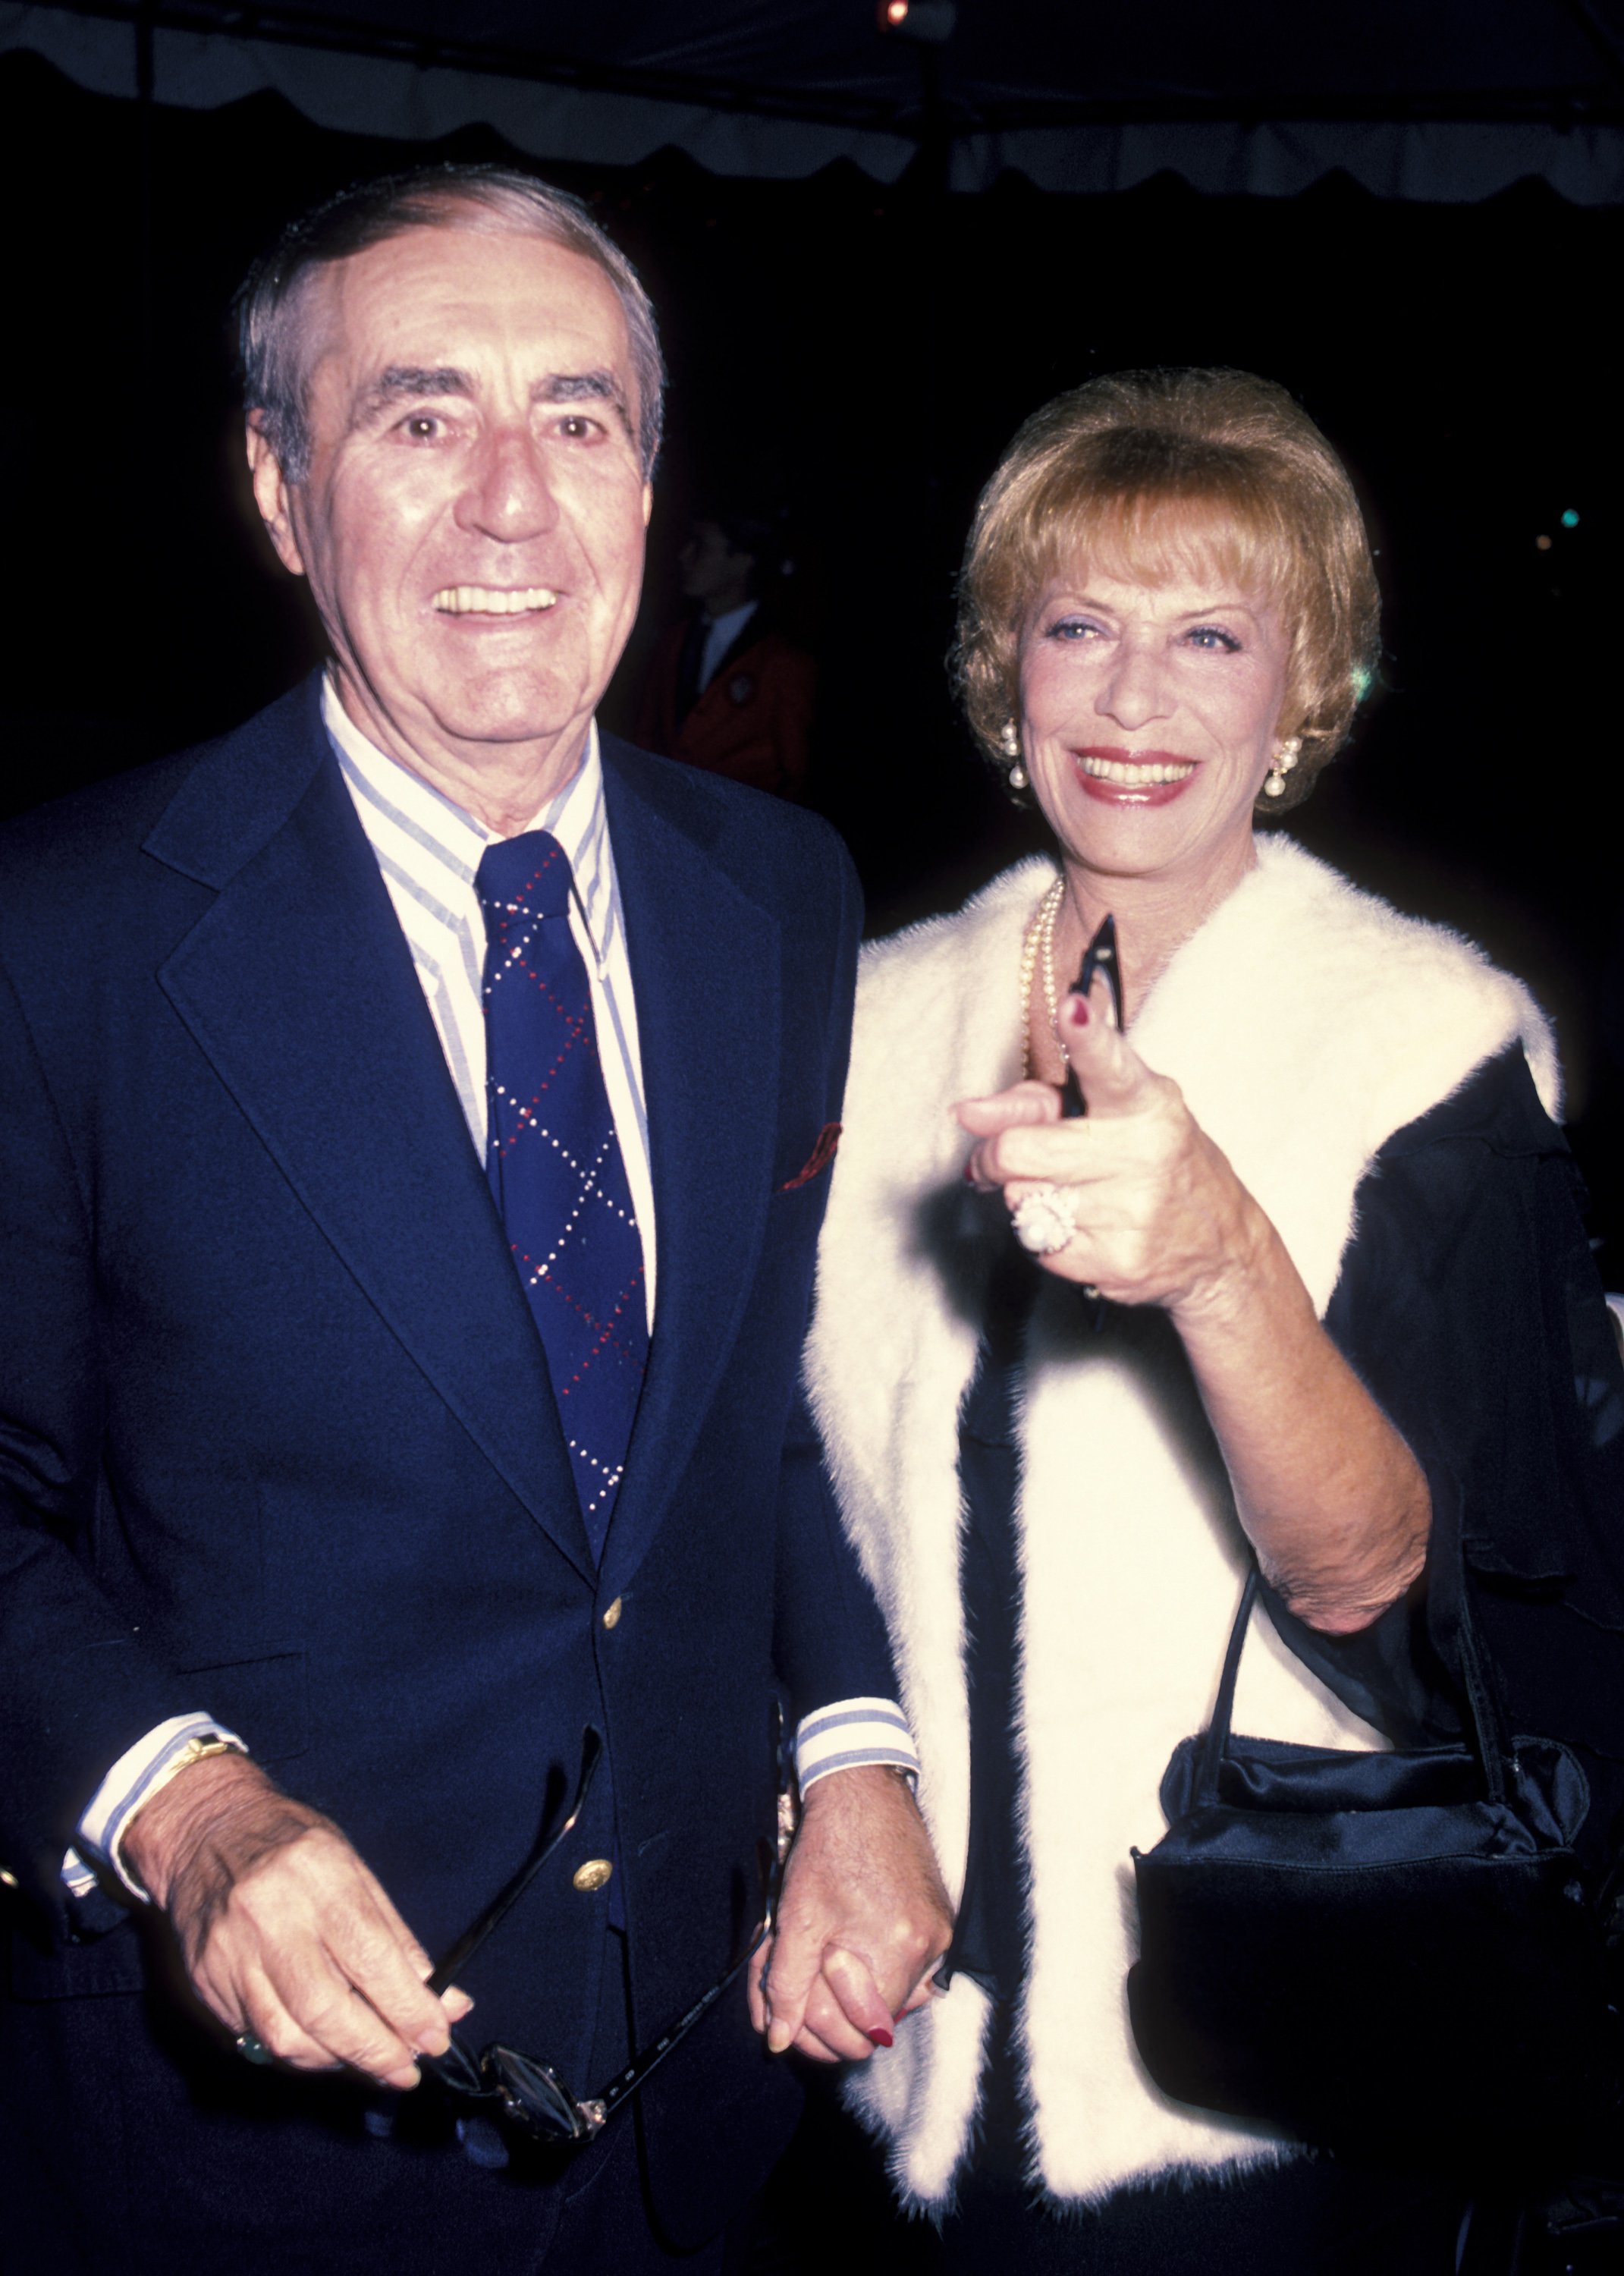 Jim Backus and his wife Henny outside Chasen's Restaurant on November 11, 1983, in Beverly Hills, California. | Source: Getty Images